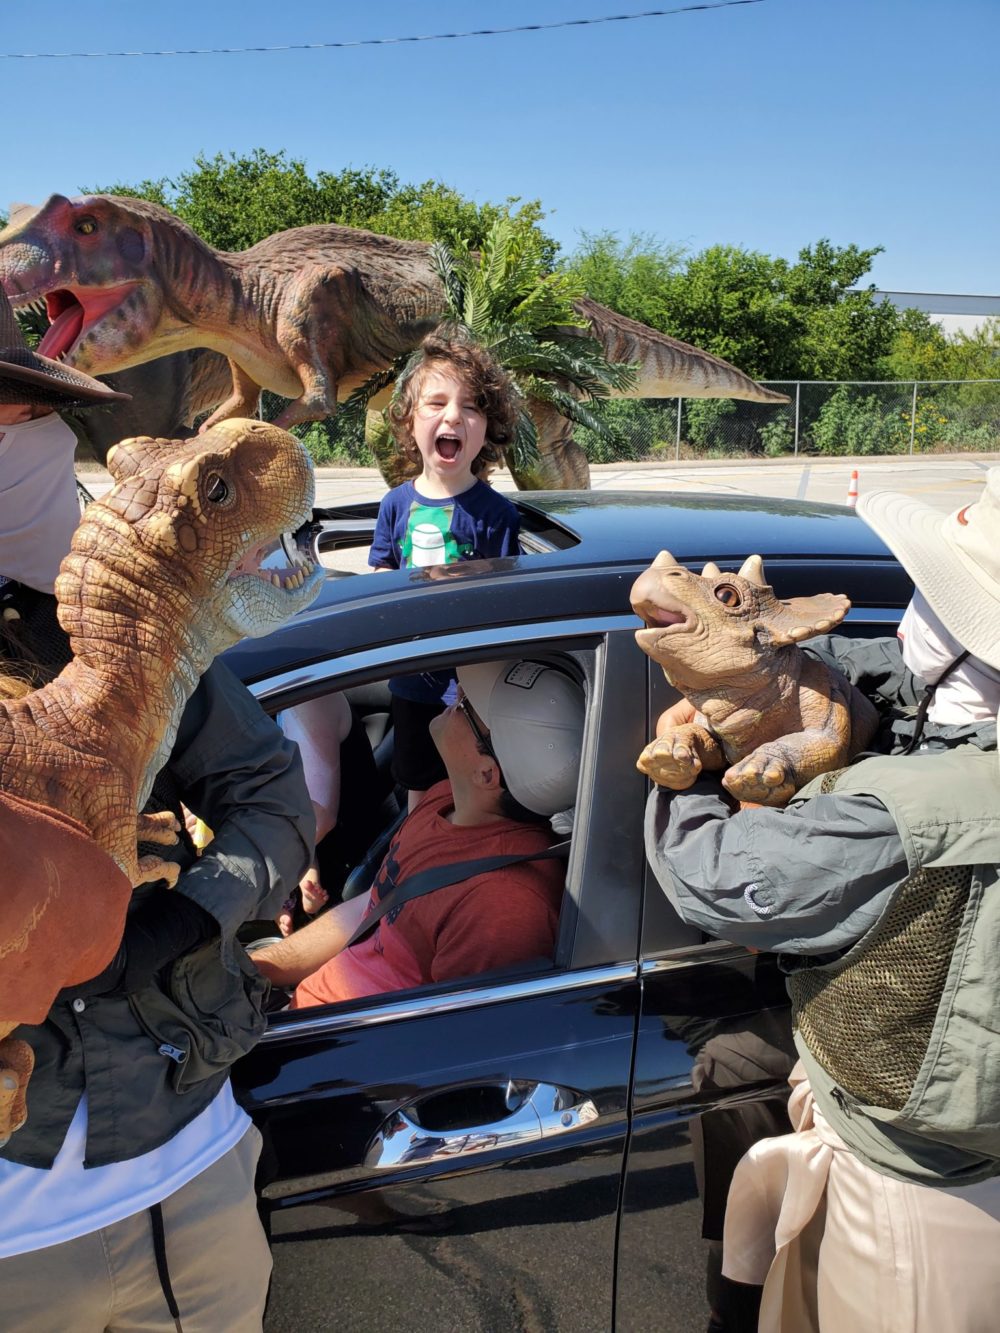 Celebrate Dinosaur Day June 1 with Jurassic Quest in Houston, Texas